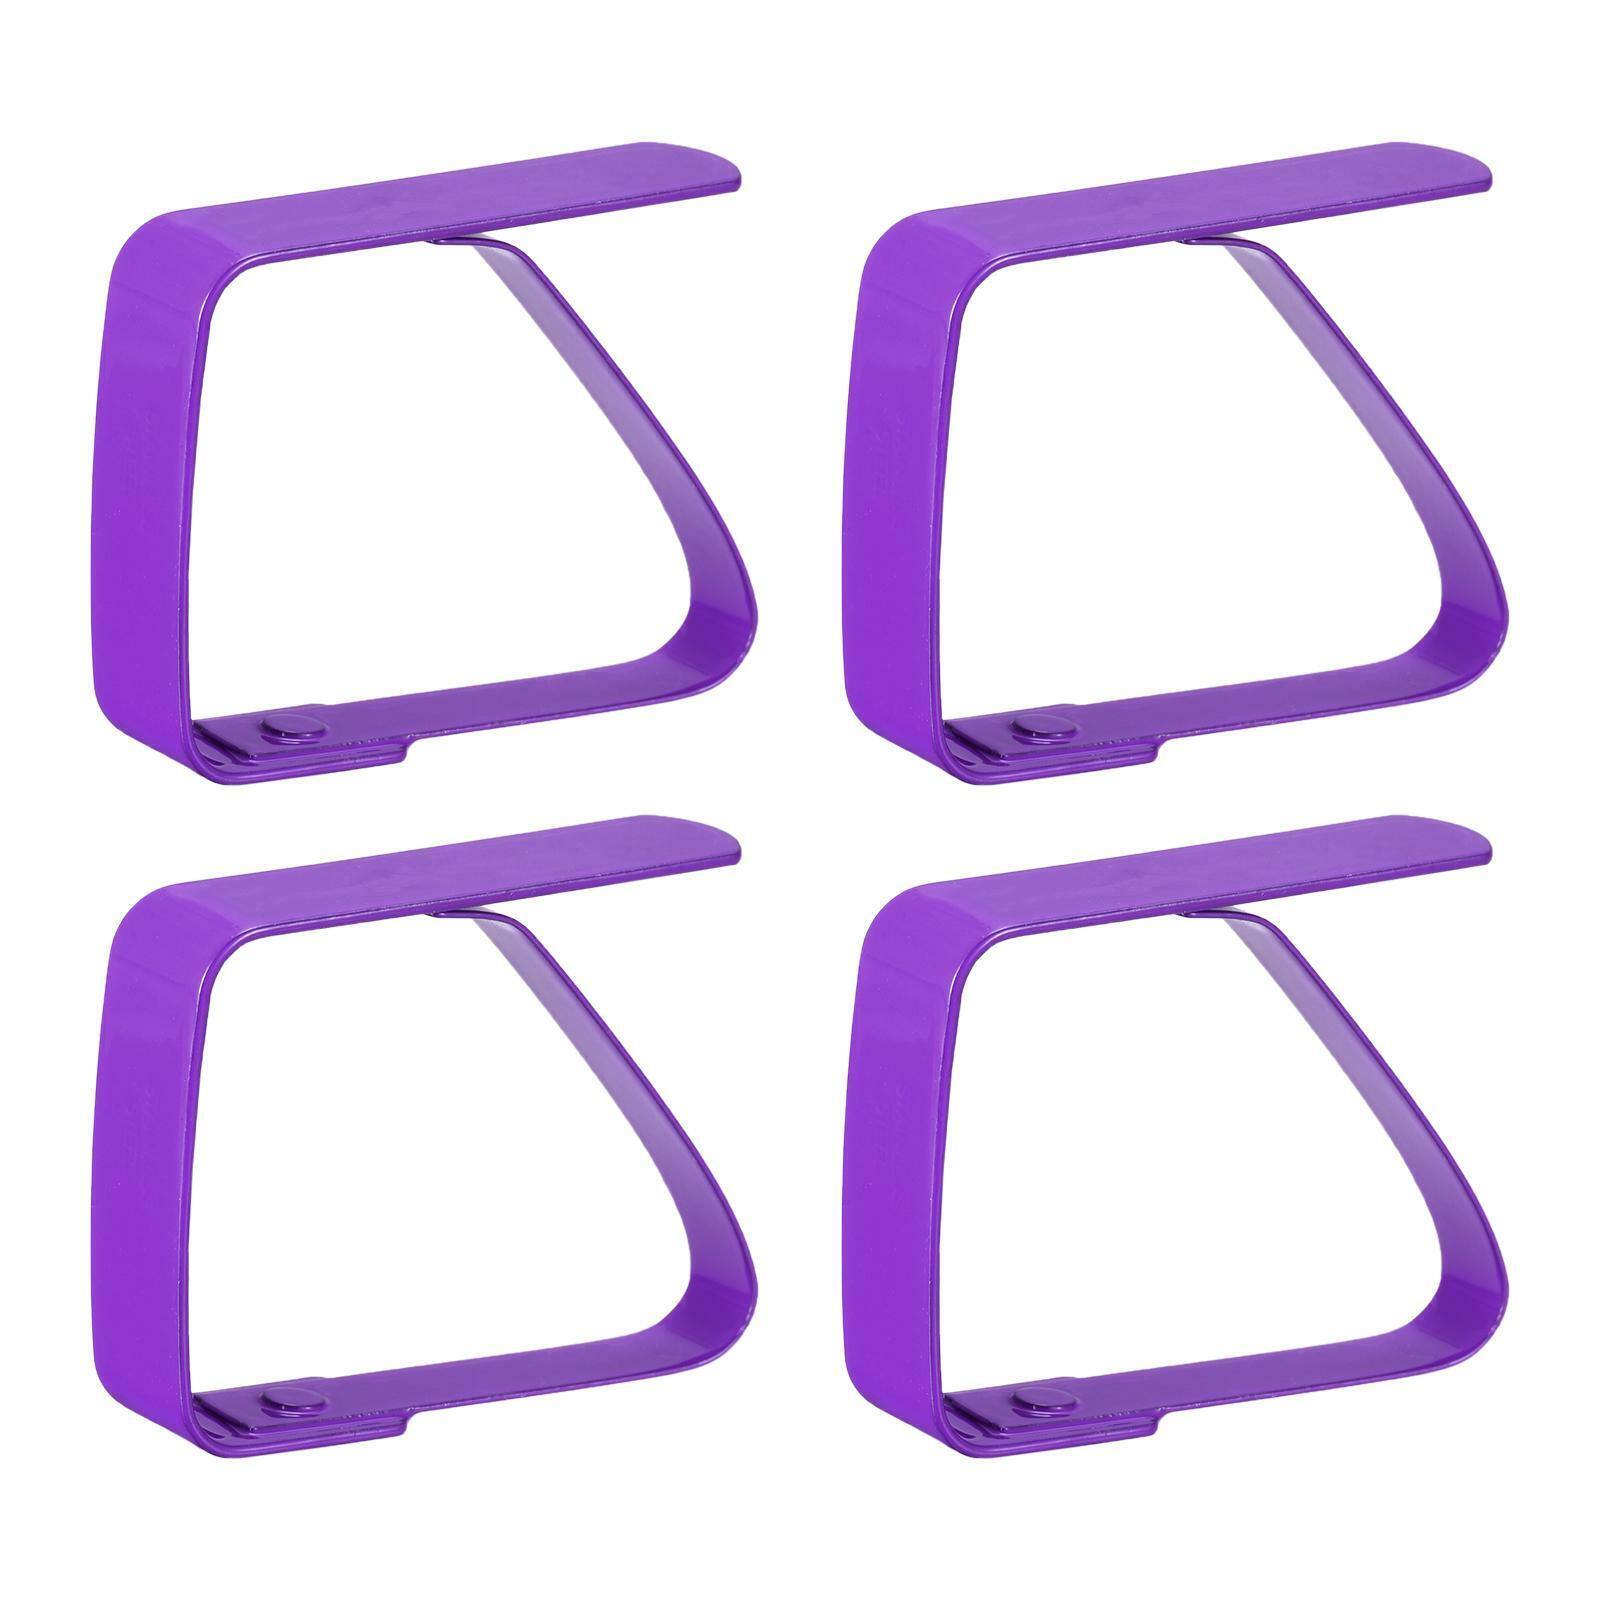 Tablecloth Clips 50mm X 40mm 420 Stainless Steel Table Cloth Holder Purple 12pcs